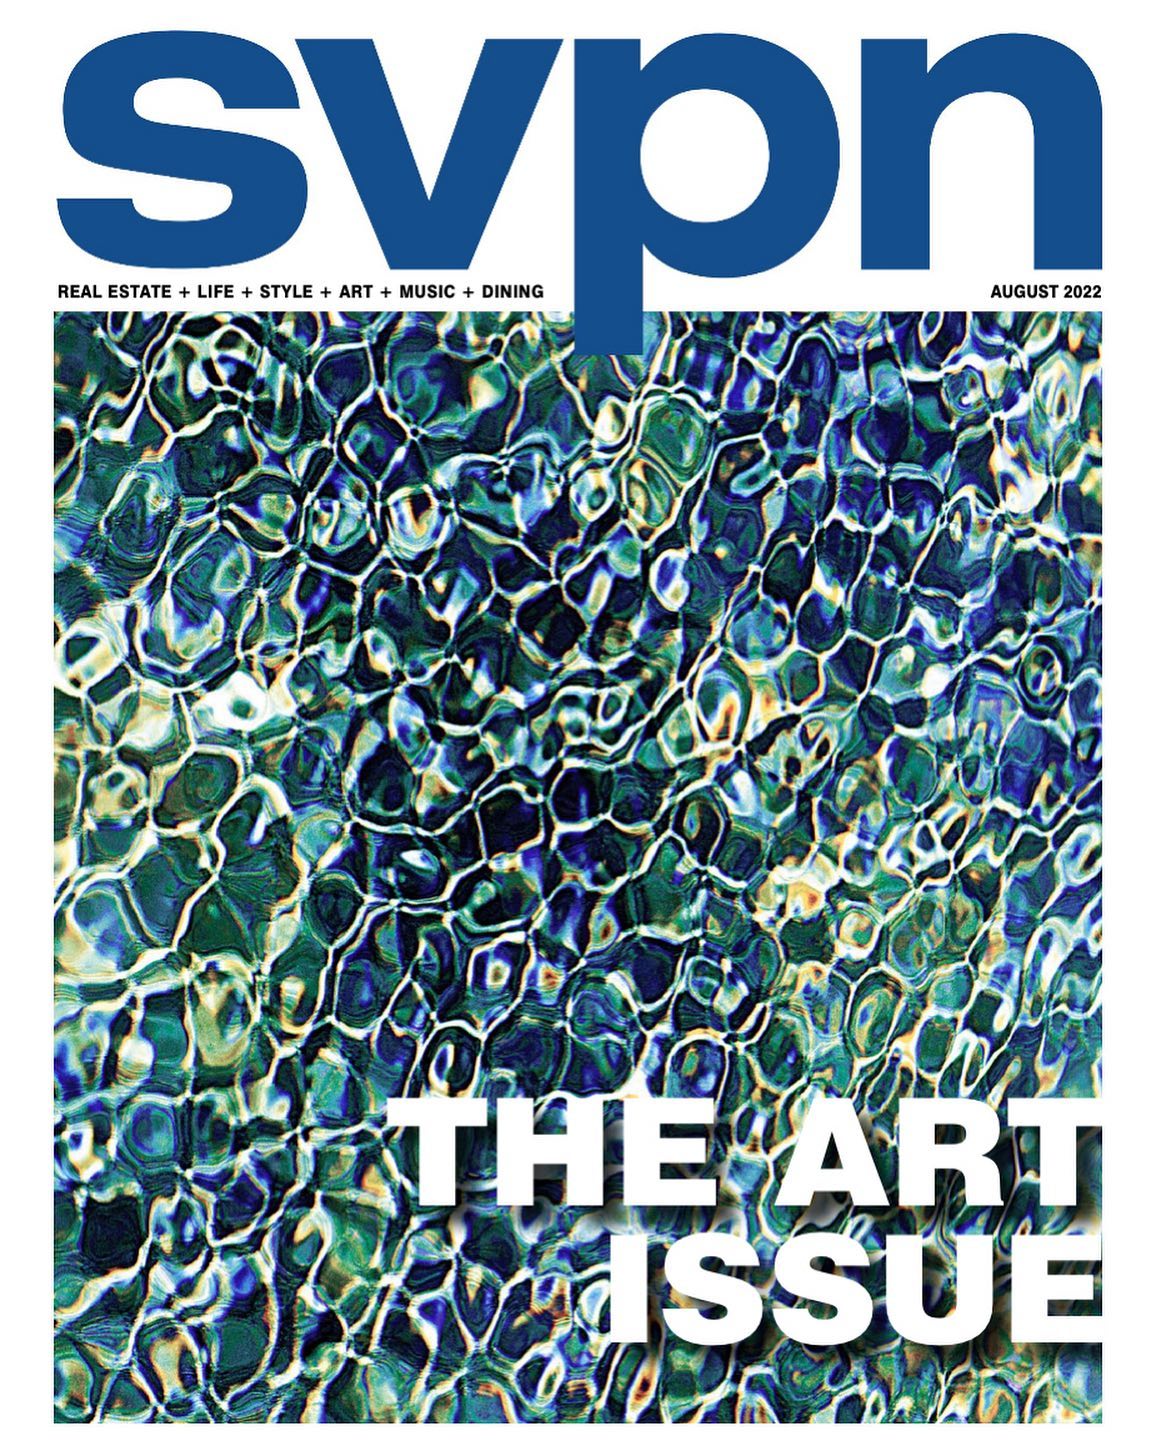 The SVPN Magazine 2022 August Art Issue covers the Valley’s art scene, from live music to the Artists’ Summer Studio Tour and everything in between—it’s certainly one to hold on to!

SVPN’s Fine Arts section is packed with new exhibitions for Now Showing and articles on artists presenting new works, including fine art photographer Laura McPhee at Gail Severn Gallery. We also offer full coverage of the Artists’ Summer Studio Tour, where Valley artists from Bellevue to north of Ketchum will open their studios to the public for an entire weekend. 

In addition, we also spotlight The Picket Fence in our feature series on Valley interior designers, who offer some inside intel on décor and home decorating in Sun Valley. 

Enjoy extensive coverage of the 2022 Sun Valley Music Festival, including events, guest performers, and a nod to its 25 years of music education. For other live music, we checked in with The Record Company, which performs at River Run Lodge, the last concert of the Sun Valley Museum of Art’s summer concert series. More live music events and happenings abound in August, and SVPN has you covered in our extensive Arts Etc. calendar where you can check on dates for other local, regional, and national touring acts performing around the Valley.

In Stanley, we celebrate the 50th anniversary of the Sawtooth NRA and the Sawtooth Interpretive and Historical Association’s Forum Lecture Series and events, including the Sawtooth Salmon Festival.

Also, in this August issue, we provide a heads-up for Wagon Days and the celebration of our Valley’s history. Mark your calendars for all events, including a chance to see the Ore Wagons in motion. And don’t forget to check out the Sun Valley Restaurant Association Dining Guide to enjoy fine dining before or after attending events in August. Pick up your copy today! @svpnmagazine #svpnmagazine #augustinsunvalley #sunvalleyidaho #sunvalleystyle